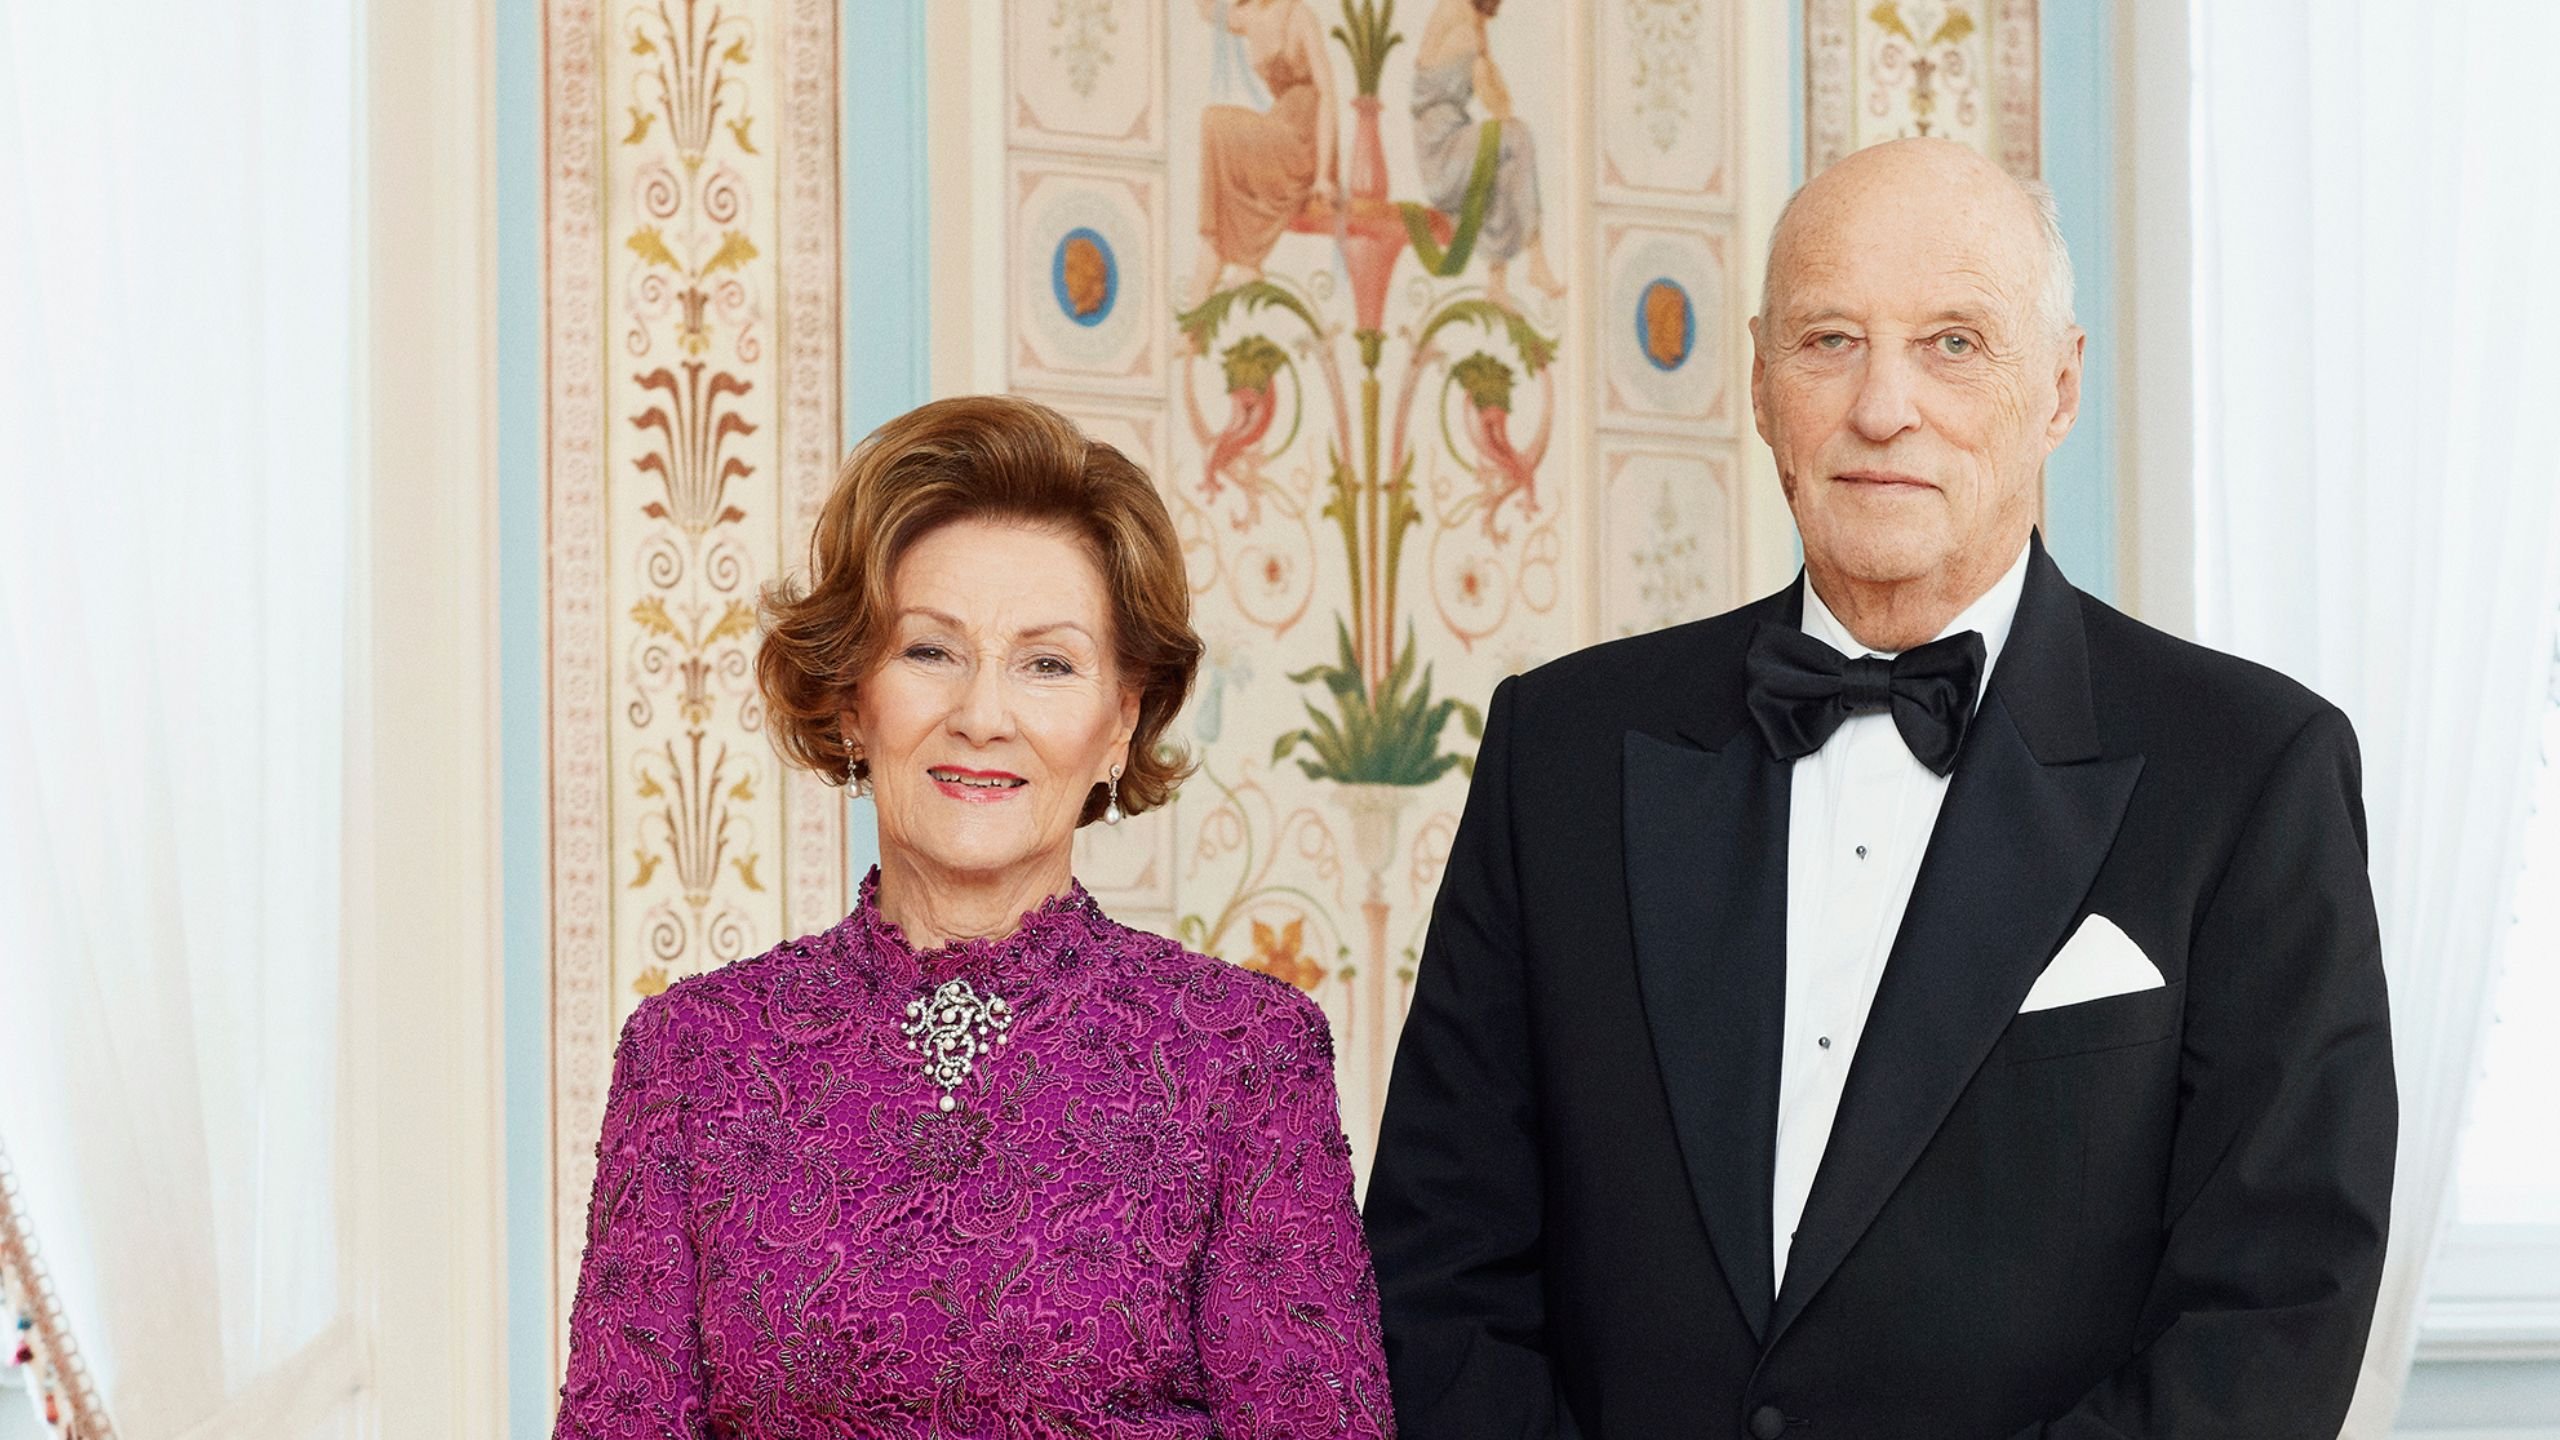 Their Majesties The King and Queen. Photo: Jørgen Gomnæs / The Royal Court.